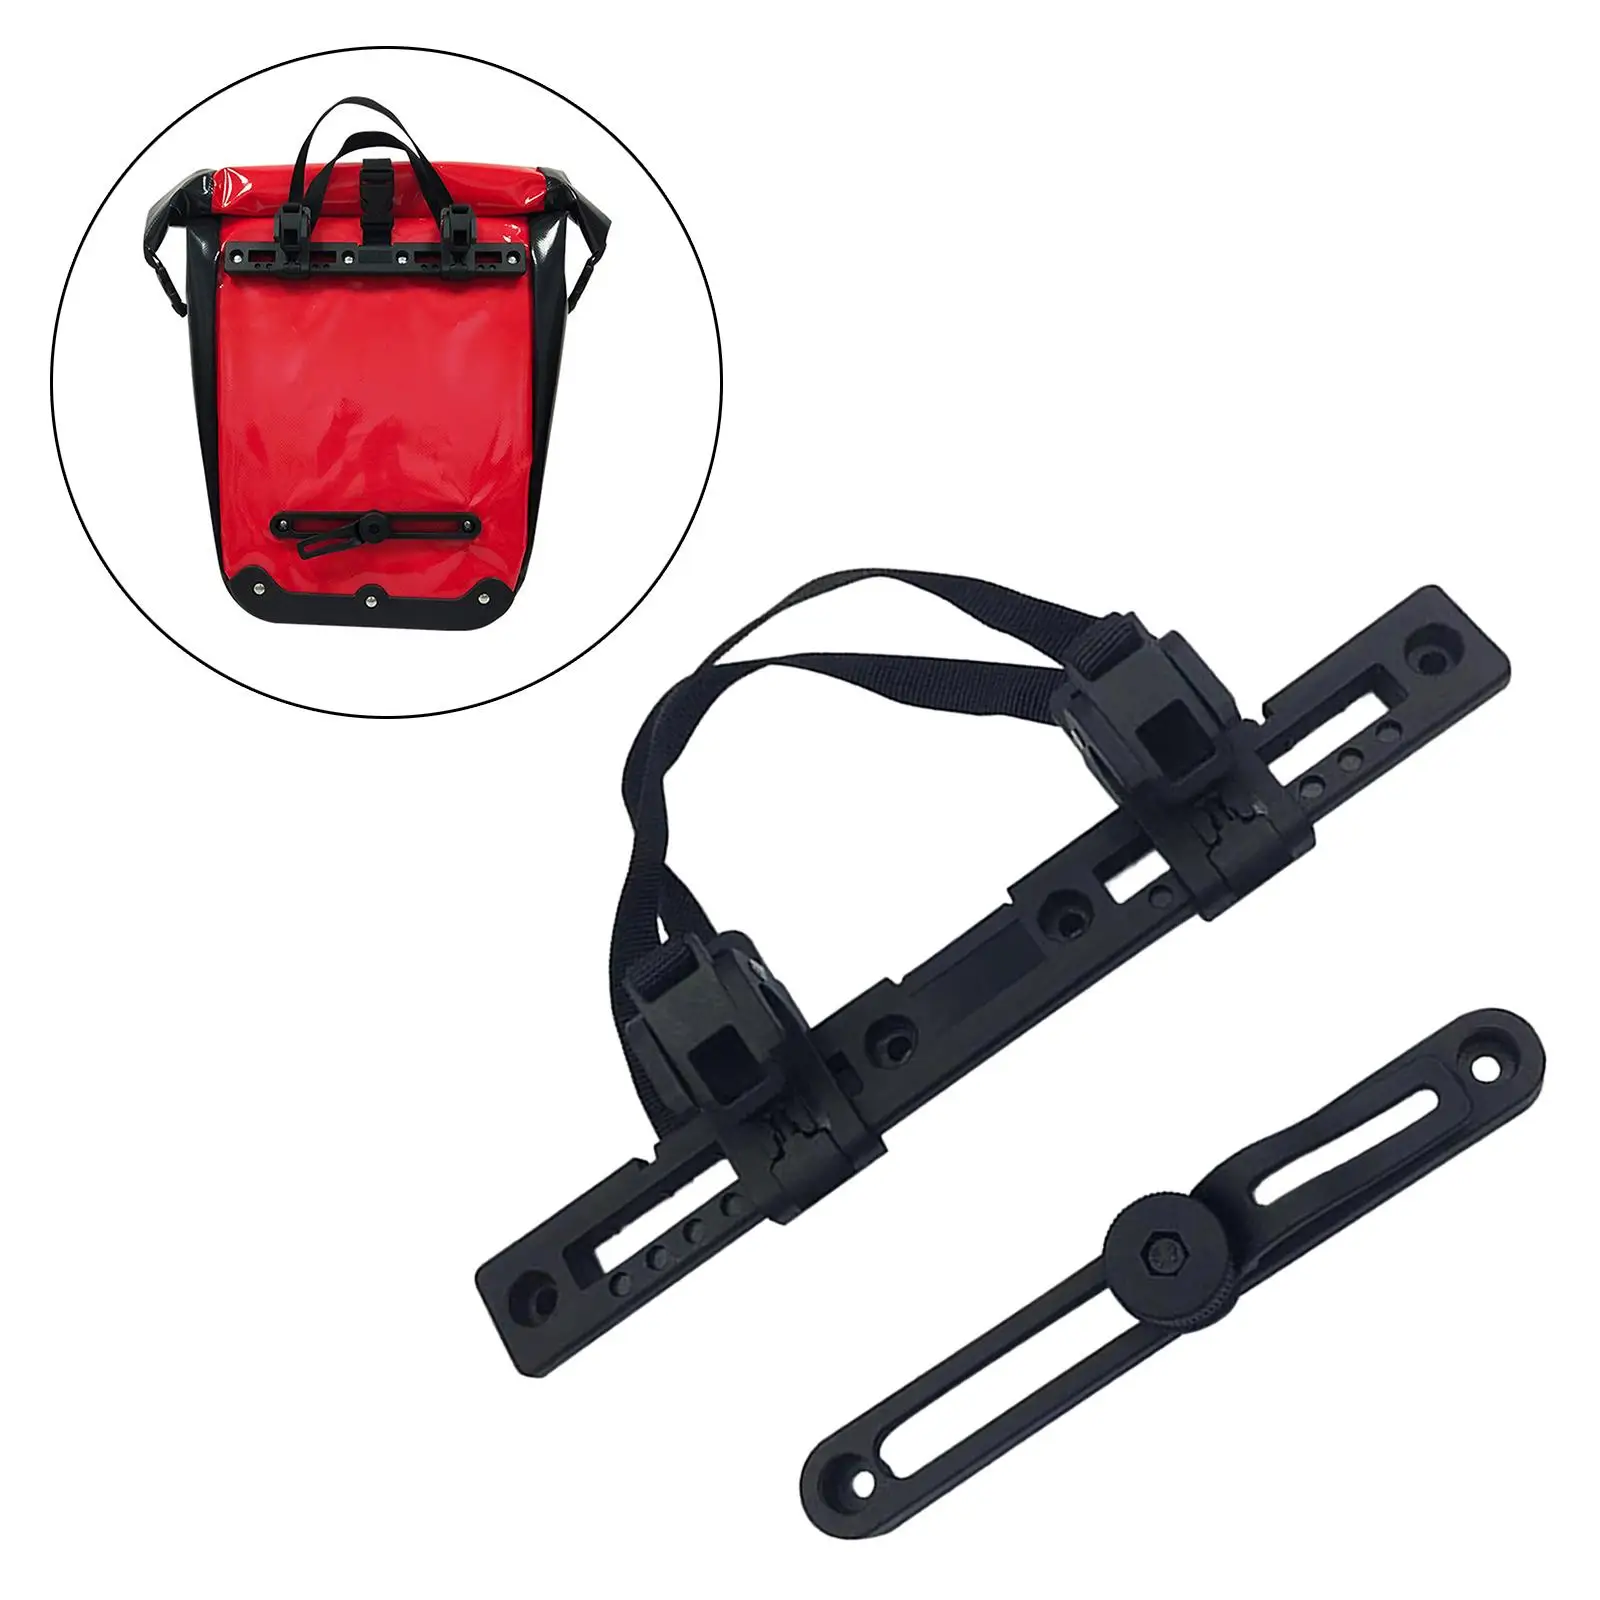 PVC Bike Bag Buckle Cycling Bike Bag Side Release Buckle Convenient for Bicycle Bags